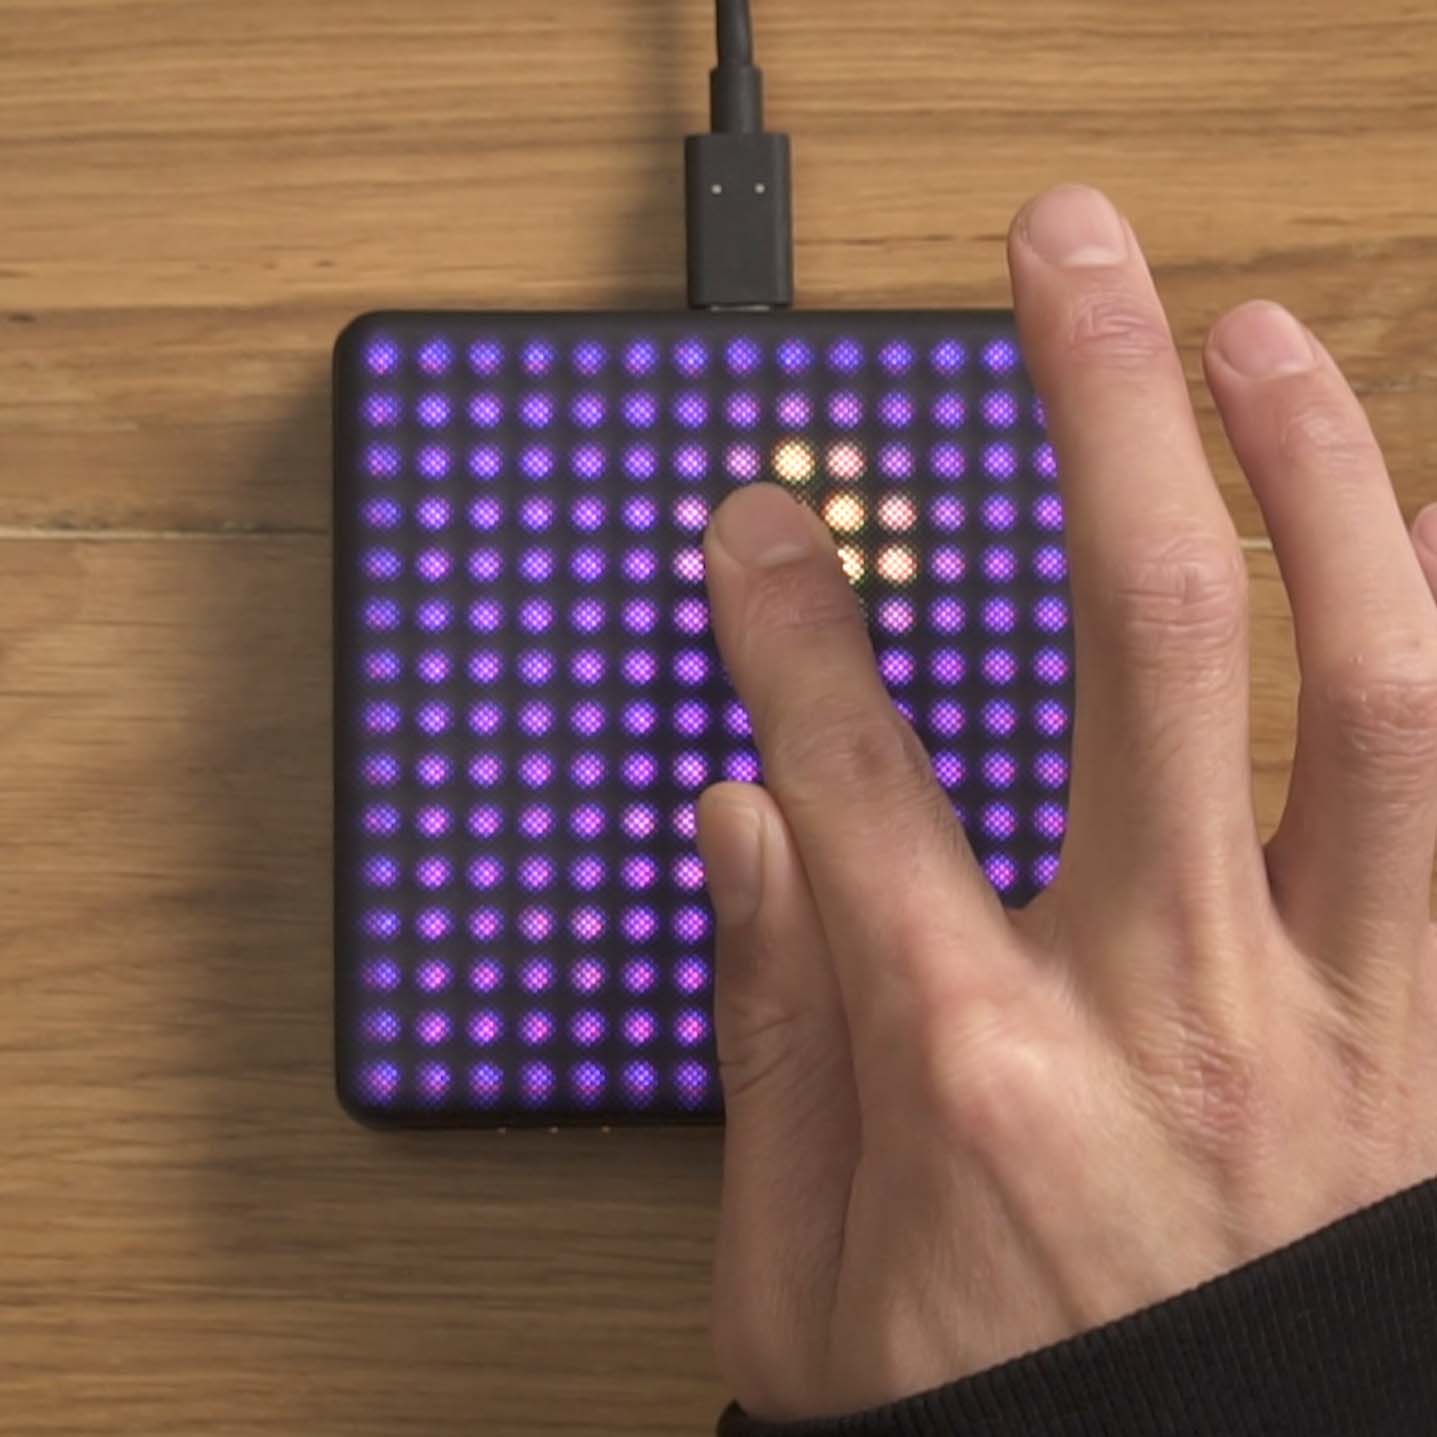 How To: use a Lightpad Block to control FX in Ableton Live | ROLI